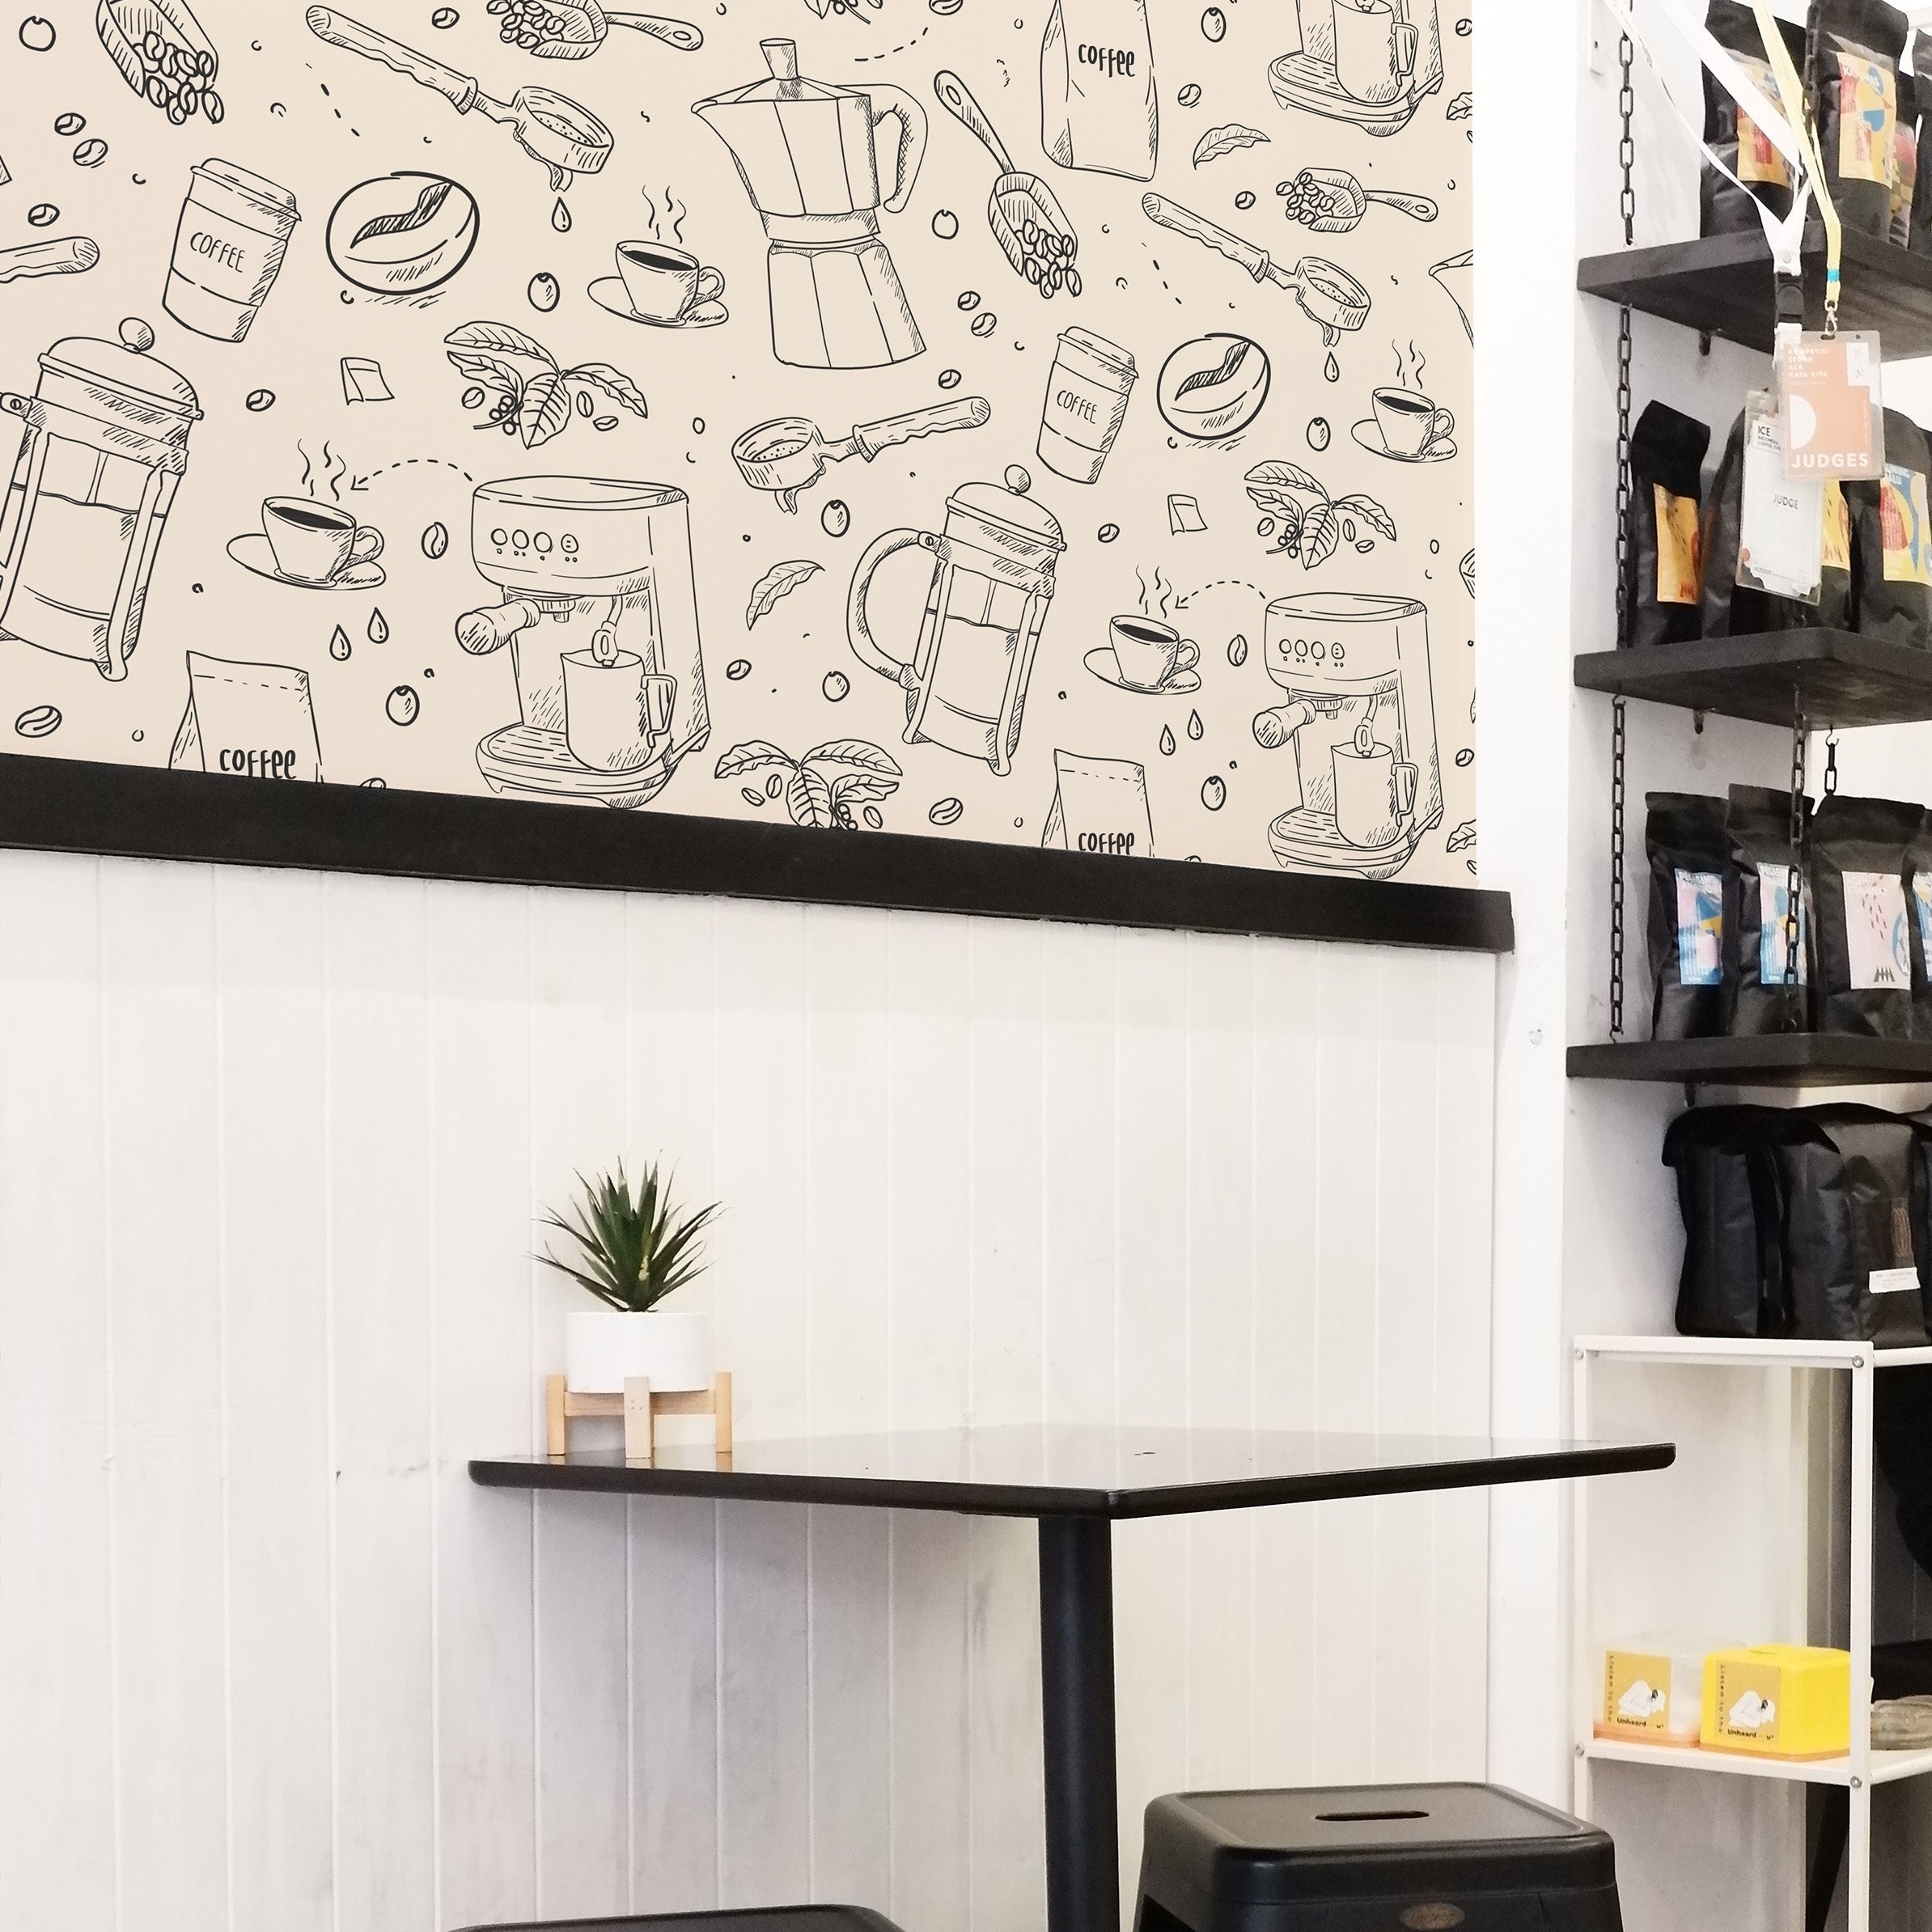 A cozy café corner featuring a unique wallpaper with hand-drawn illustrations of various coffee-making tools and beans. The wallpaper covers the upper half of the wall above a white subway-tiled lower half, accompanied by modern black metal stools and a minimalist table.